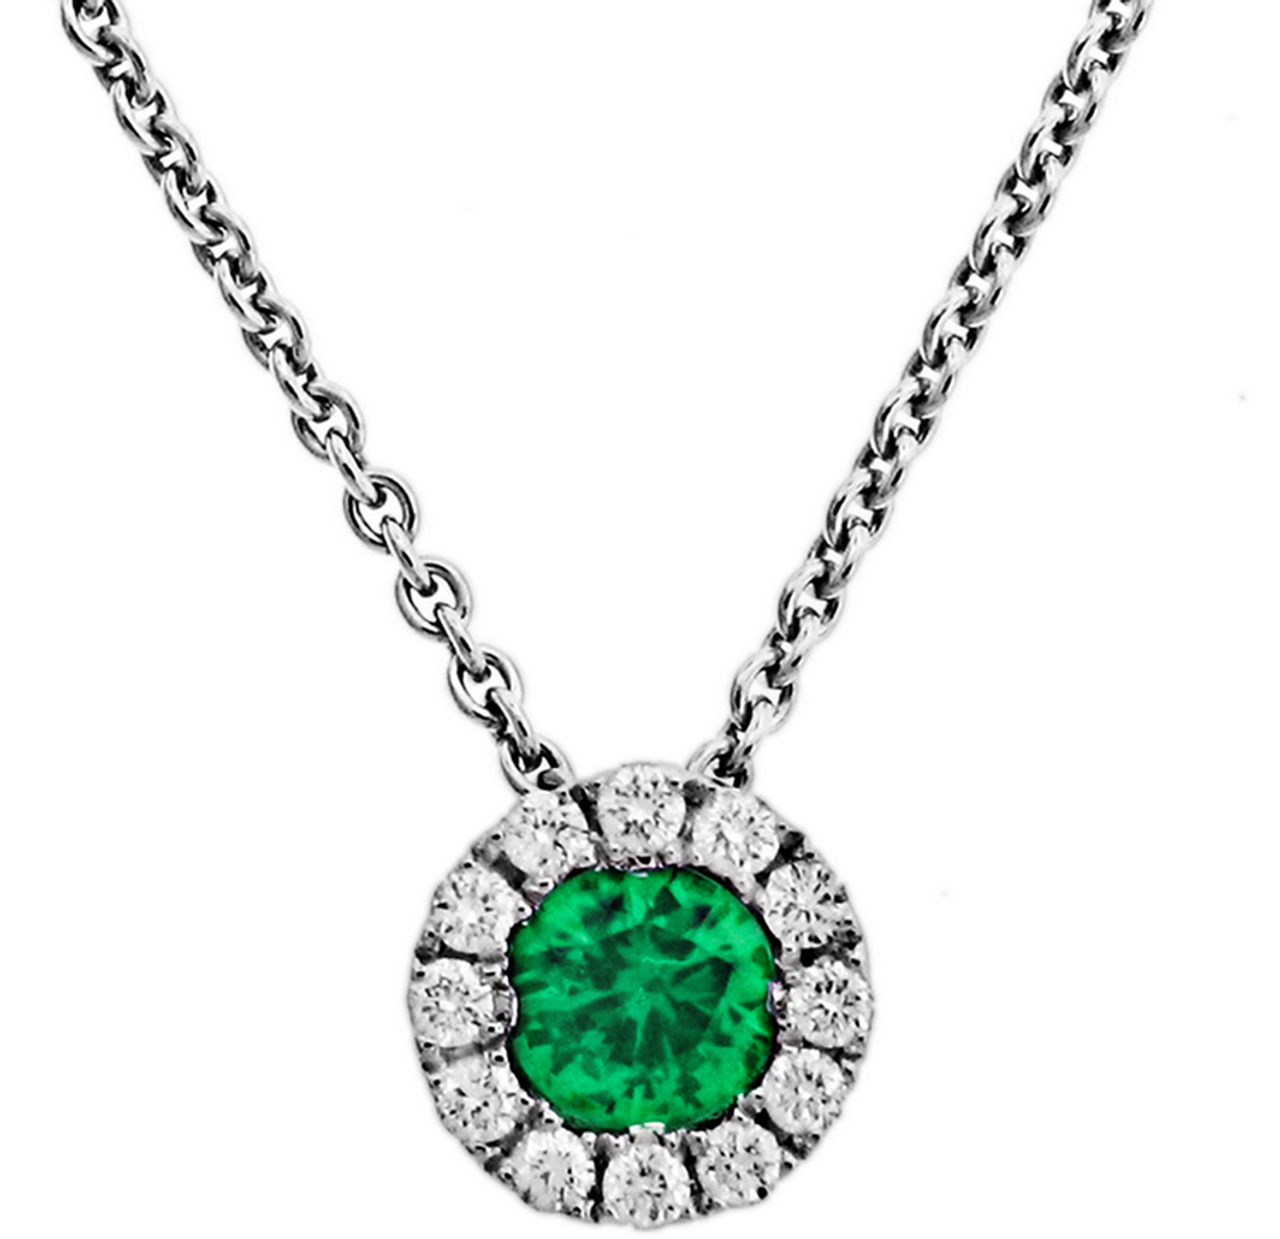 Emerald Pendant 0.50 KATHERINE White Gold and Chain 99920285742